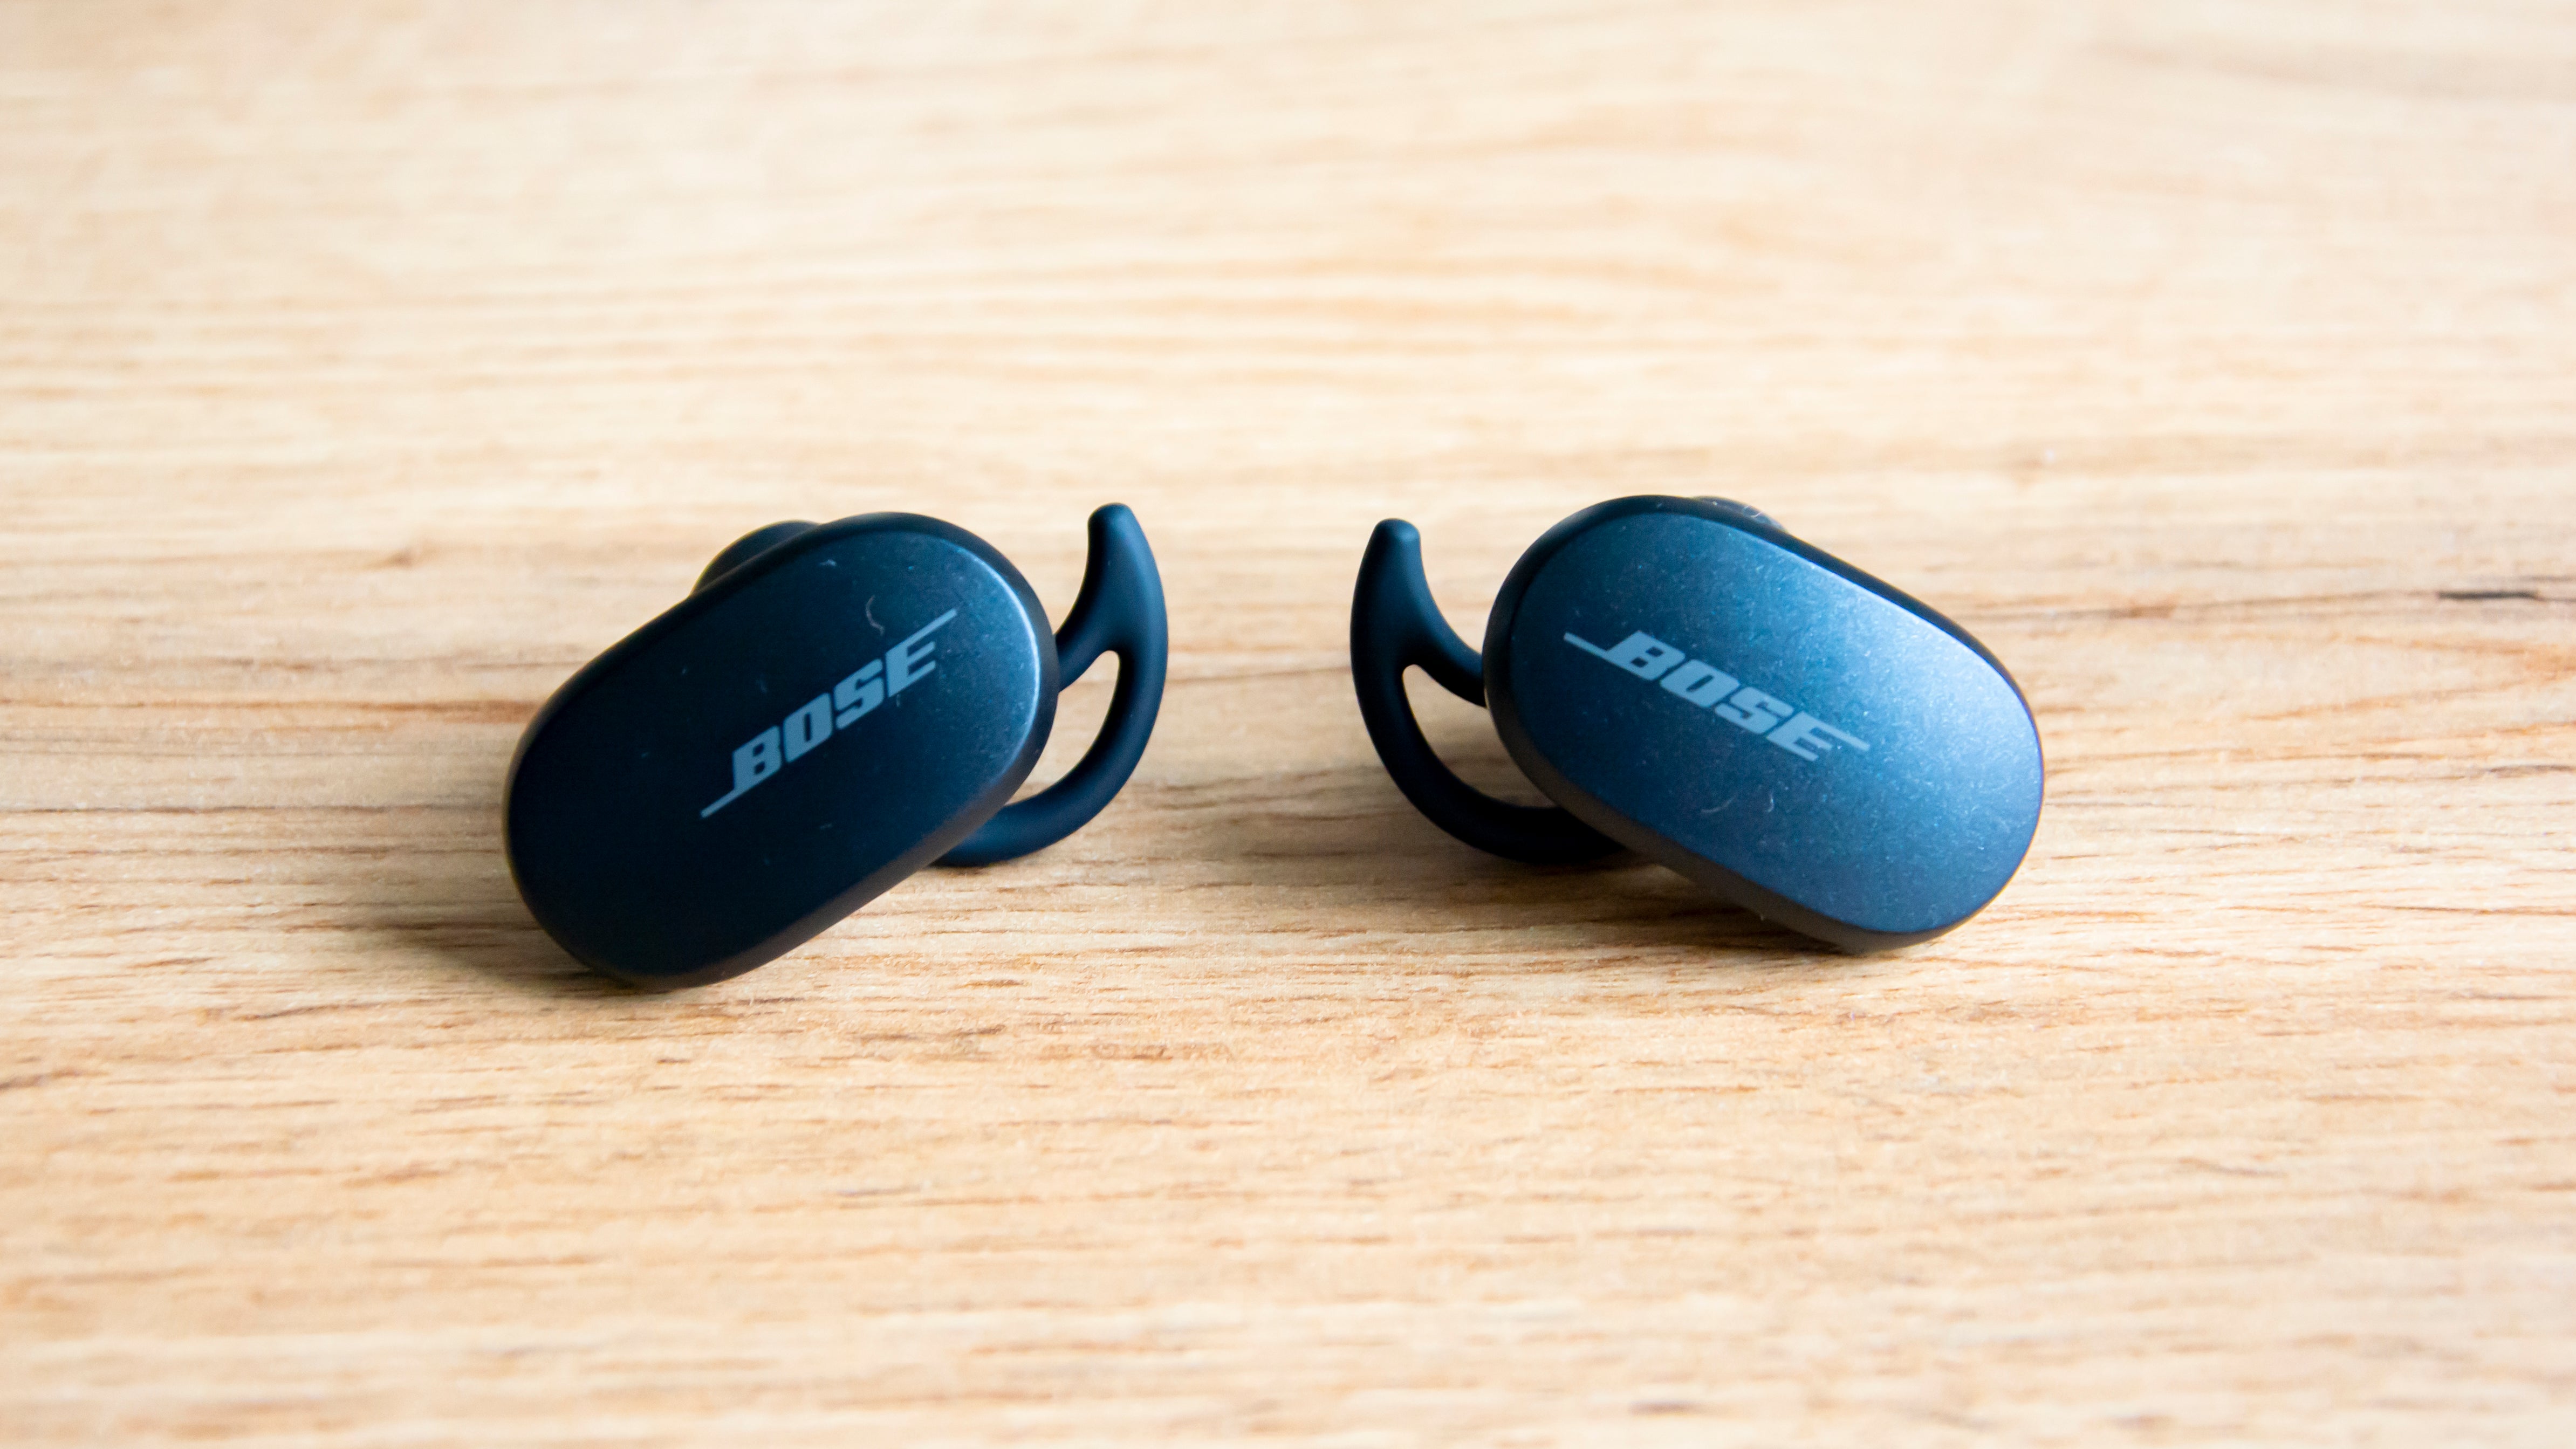 lantano vitalidad clima Bose QuietComfort Earbuds review: Superb noise-cancelling earbuds | Expert  Reviews